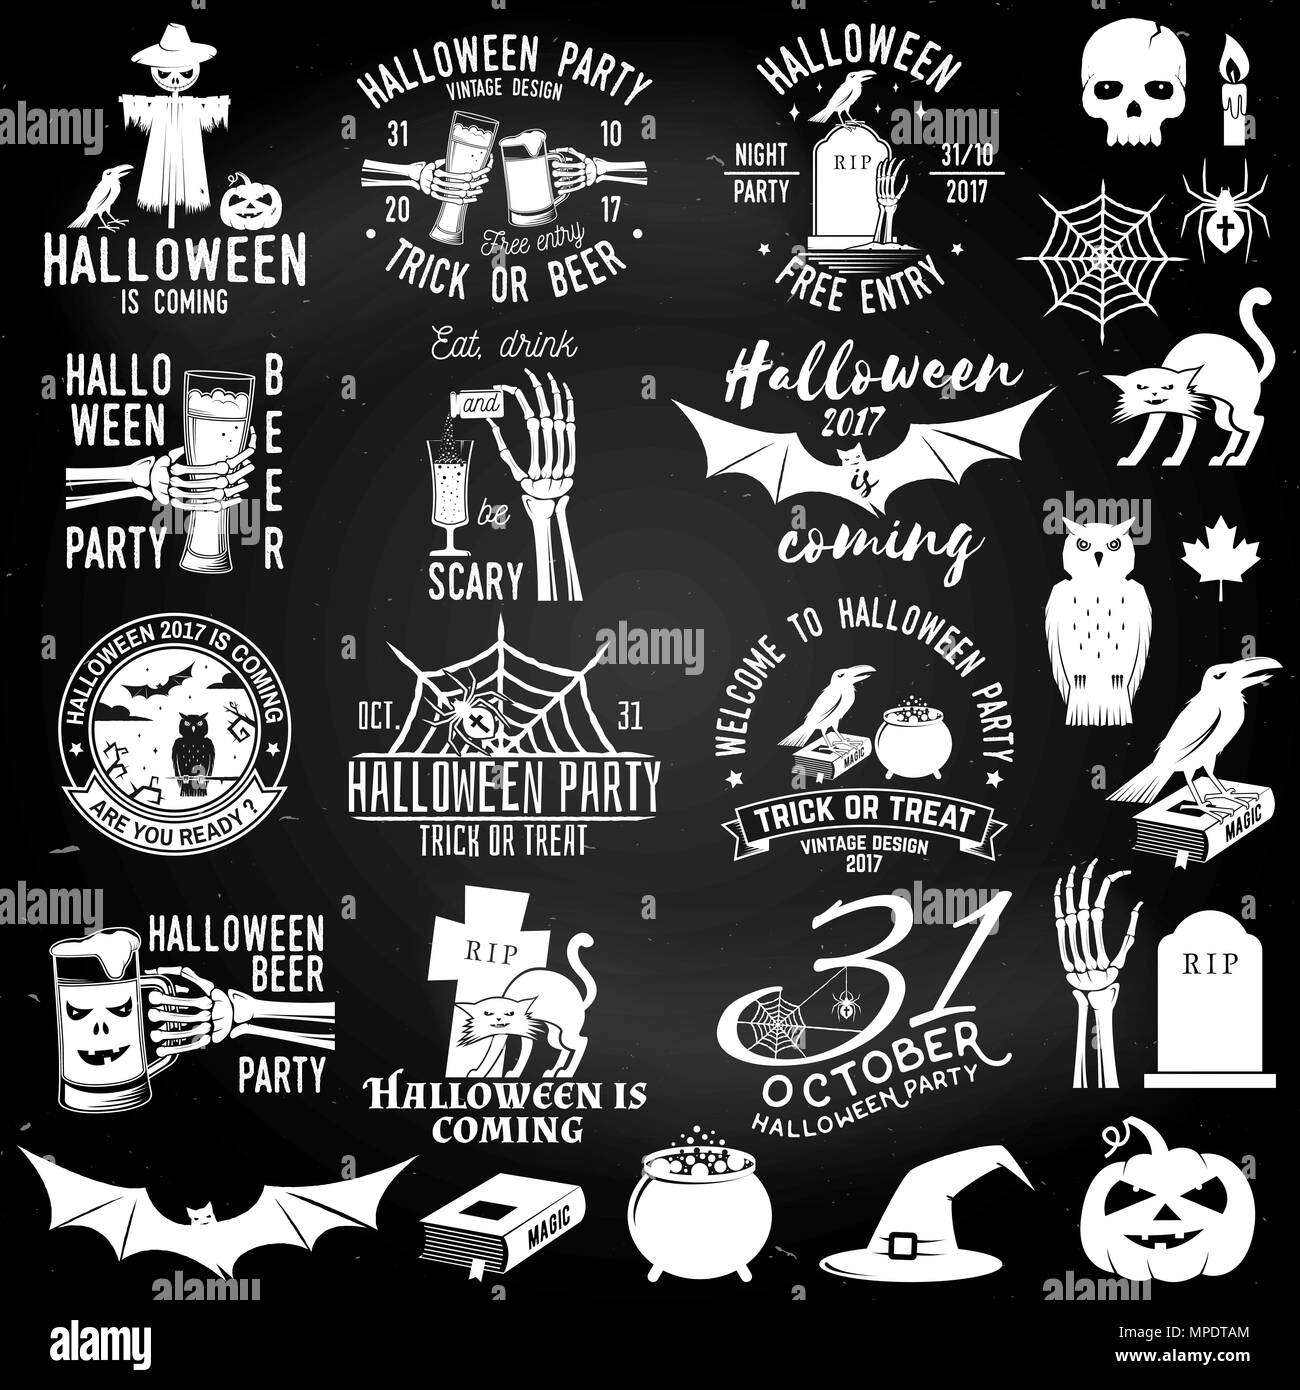 https://c8.alamy.com/comp/MPDTAM/set-of-halloween-party-concept-on-the-chalkboard-halloween-party-retro-templates-badges-seals-patches-with-design-elements-concept-for-shirt-or-l-MPDTAM.jpg